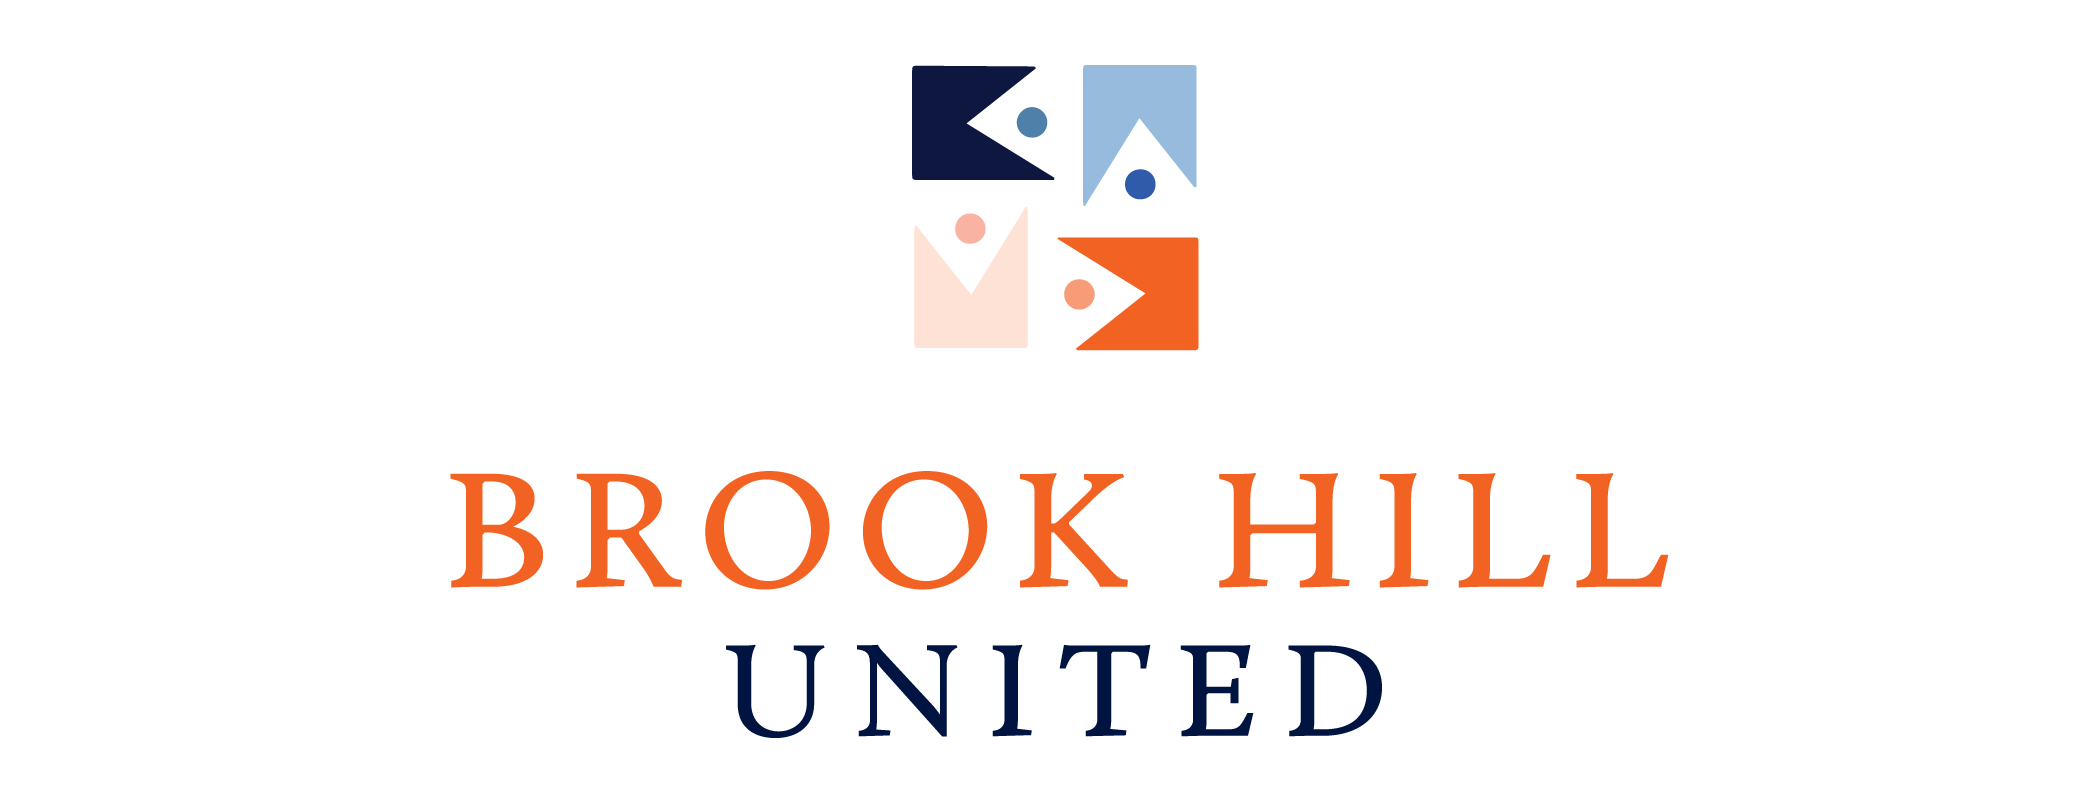 Office 365 - The Brook Hill School